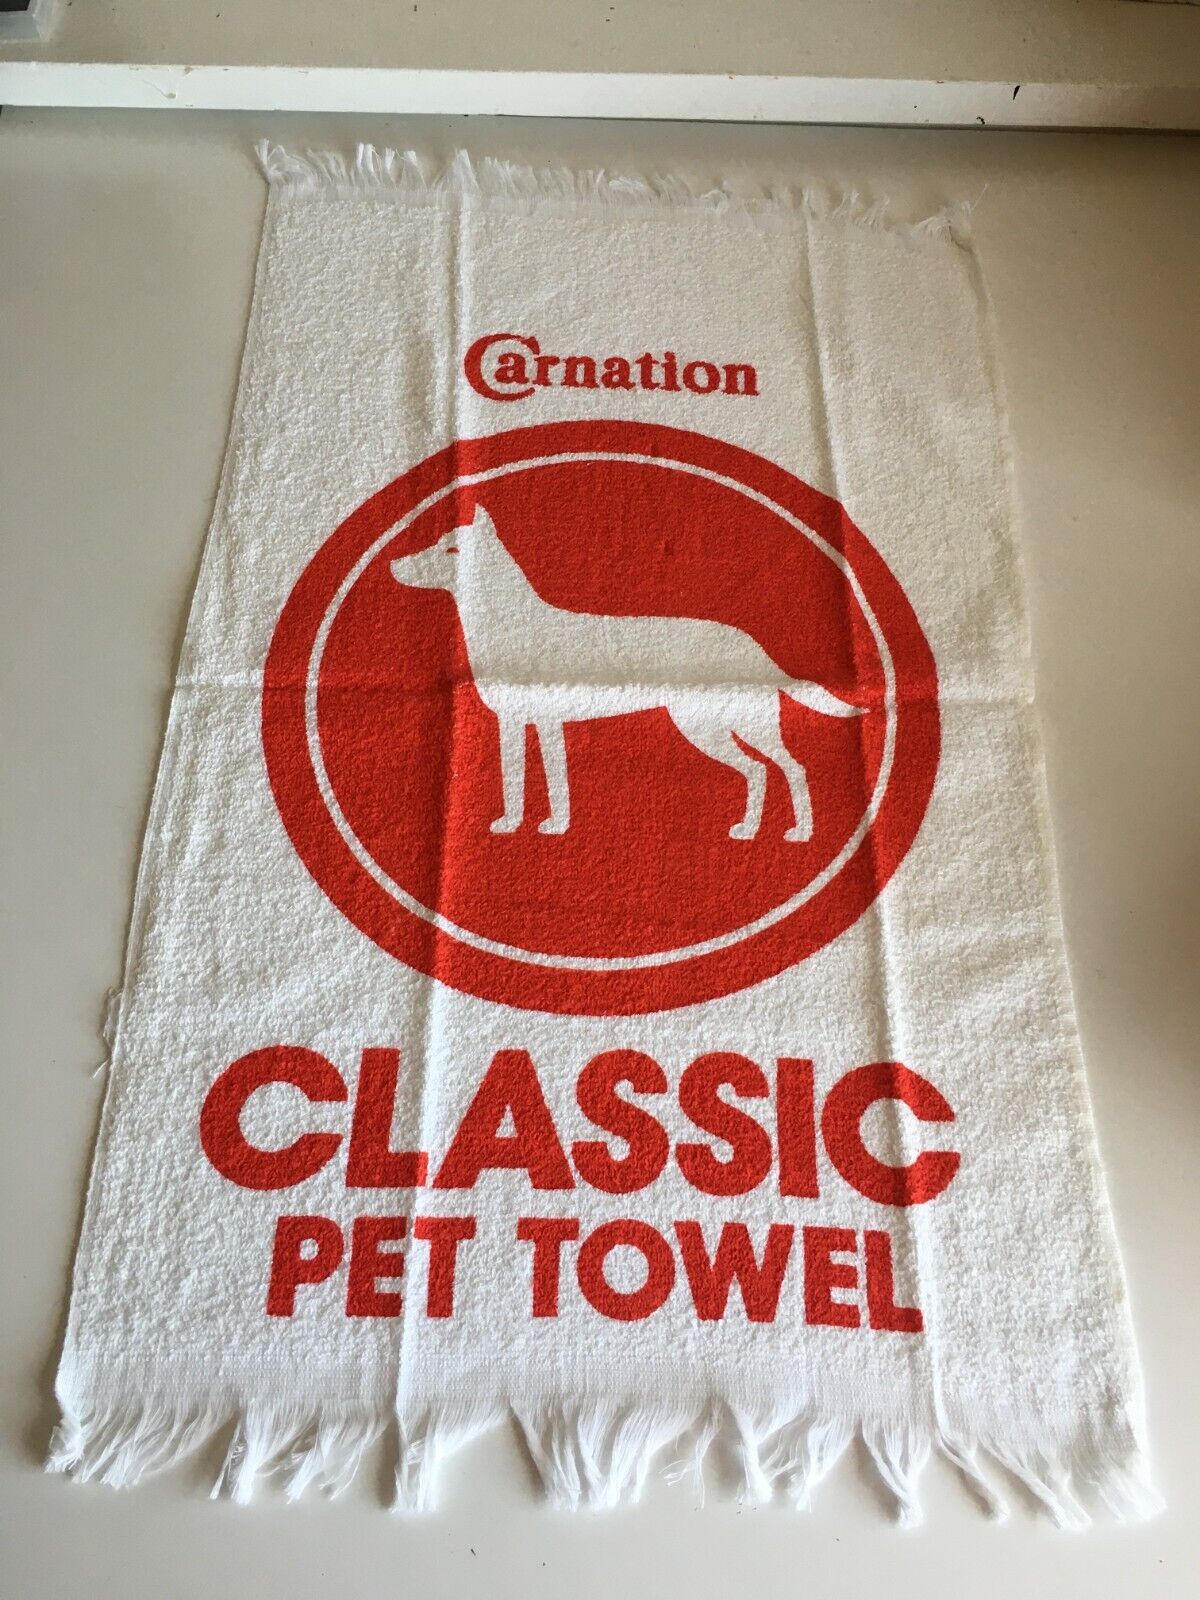 The Carnation company Classic Pet Towel Red/White Advertising Promotional